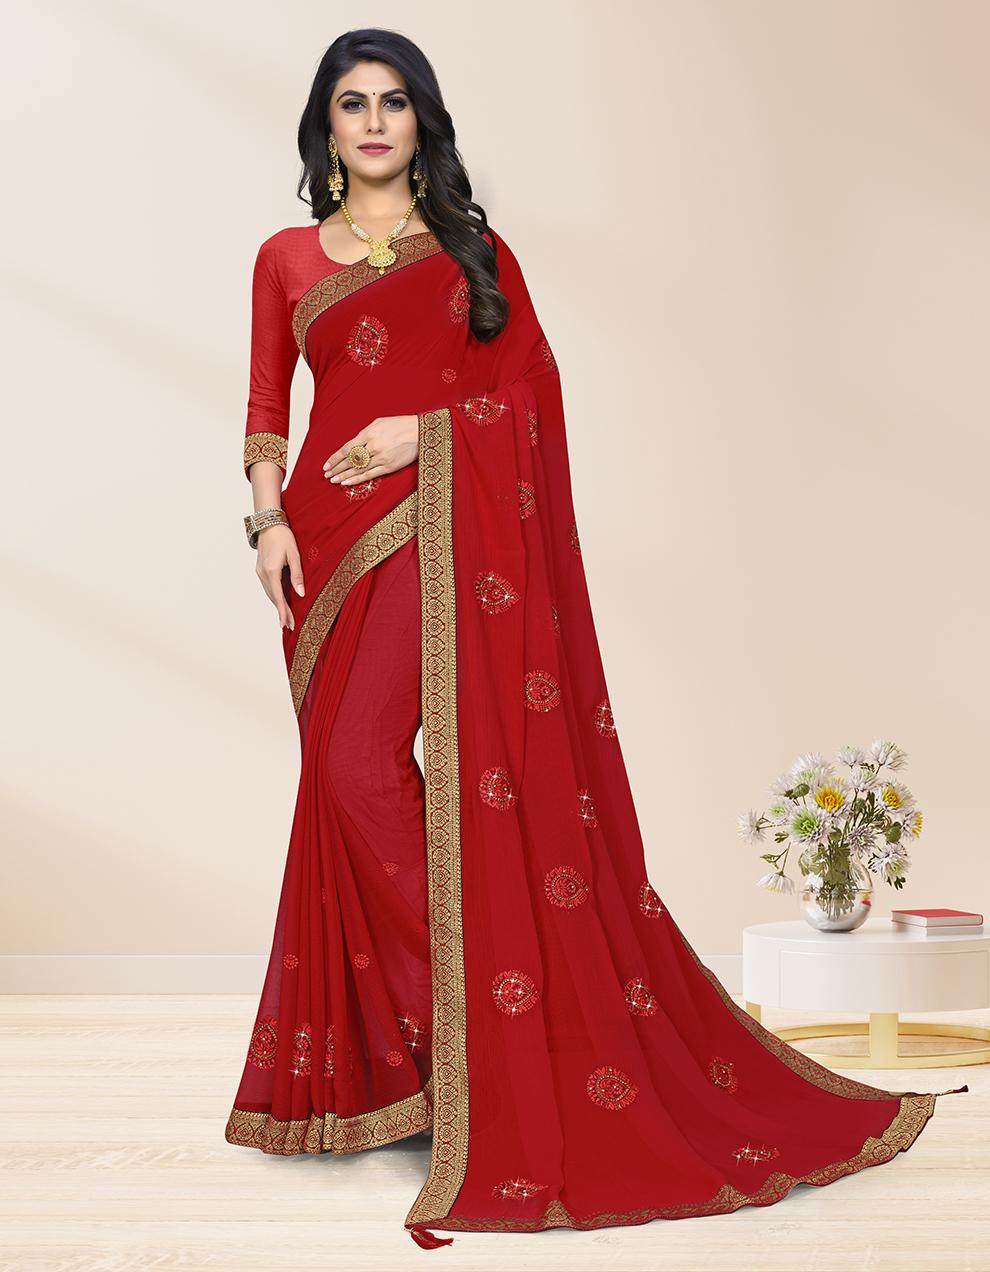 Red Chiffon Saree With Blouse IW26966